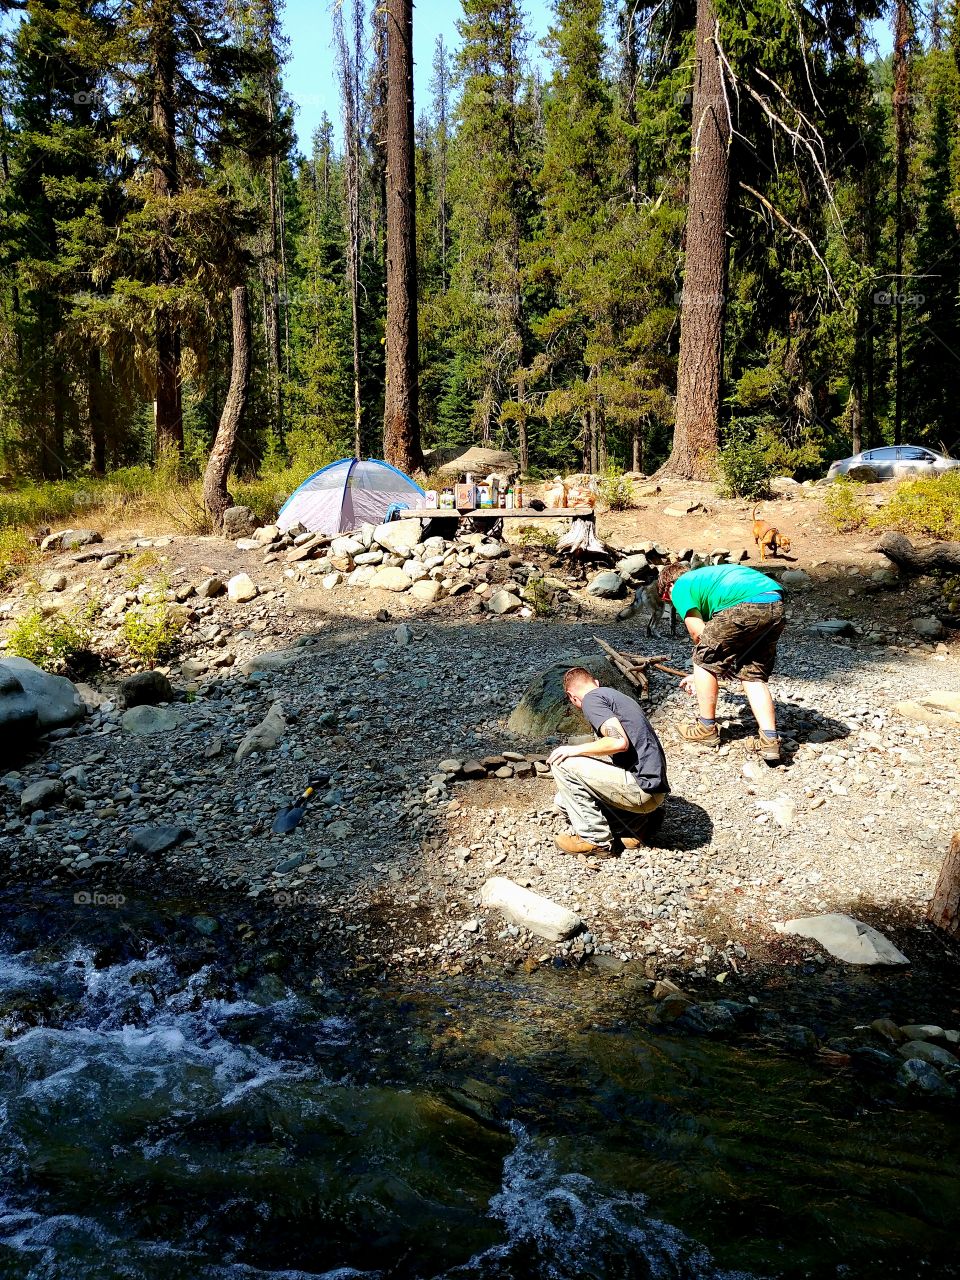 Summer camping! A perfect spot to base ourselves for a gorgeous day hike.